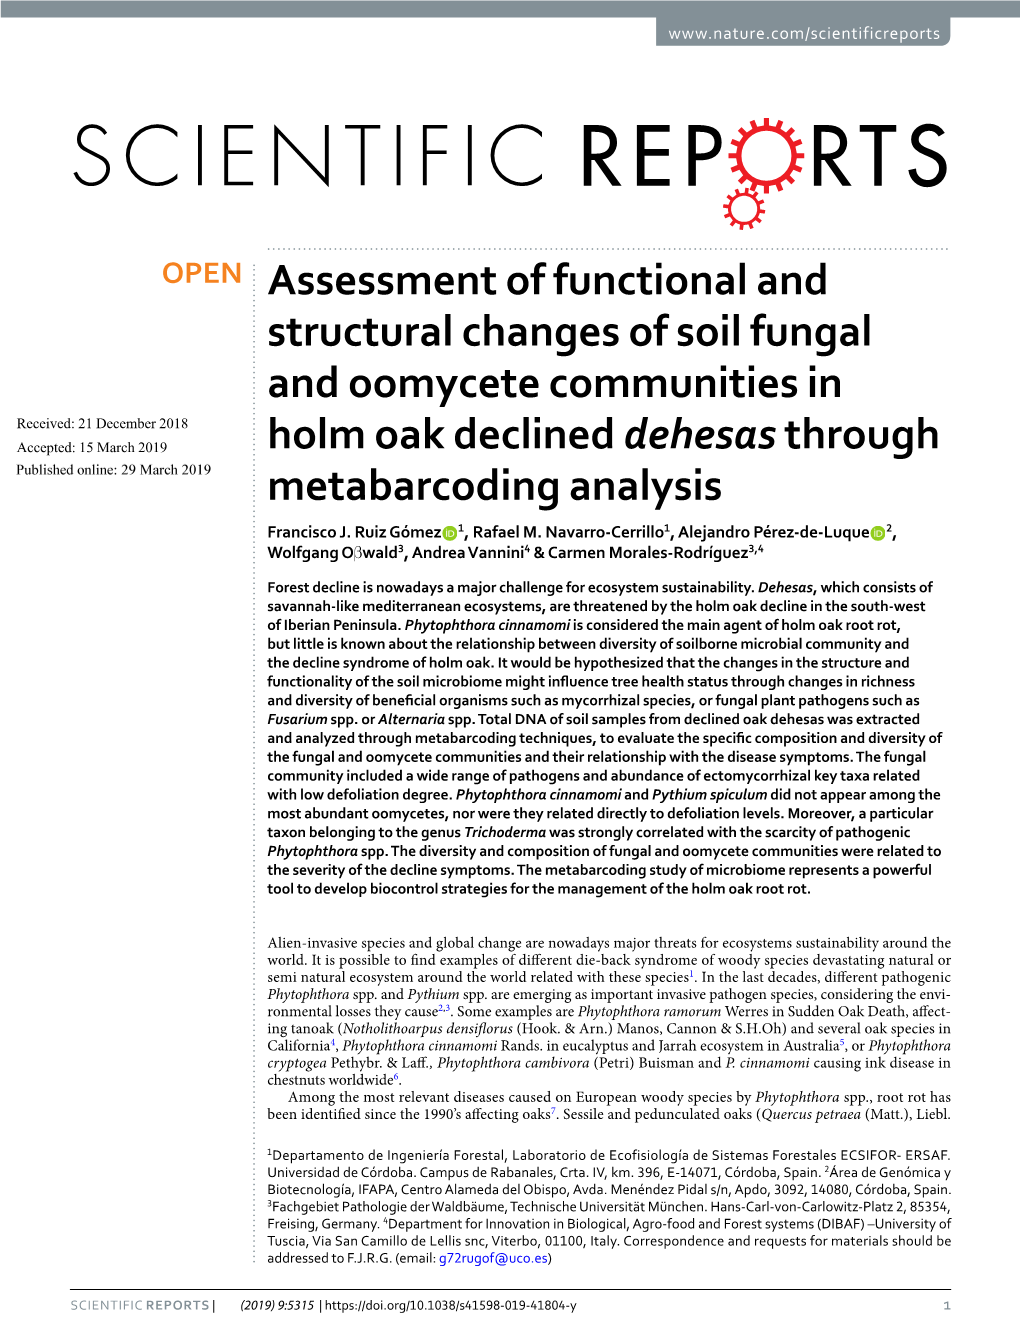 Assessment of Functional and Structural Changes of Soil Fungal